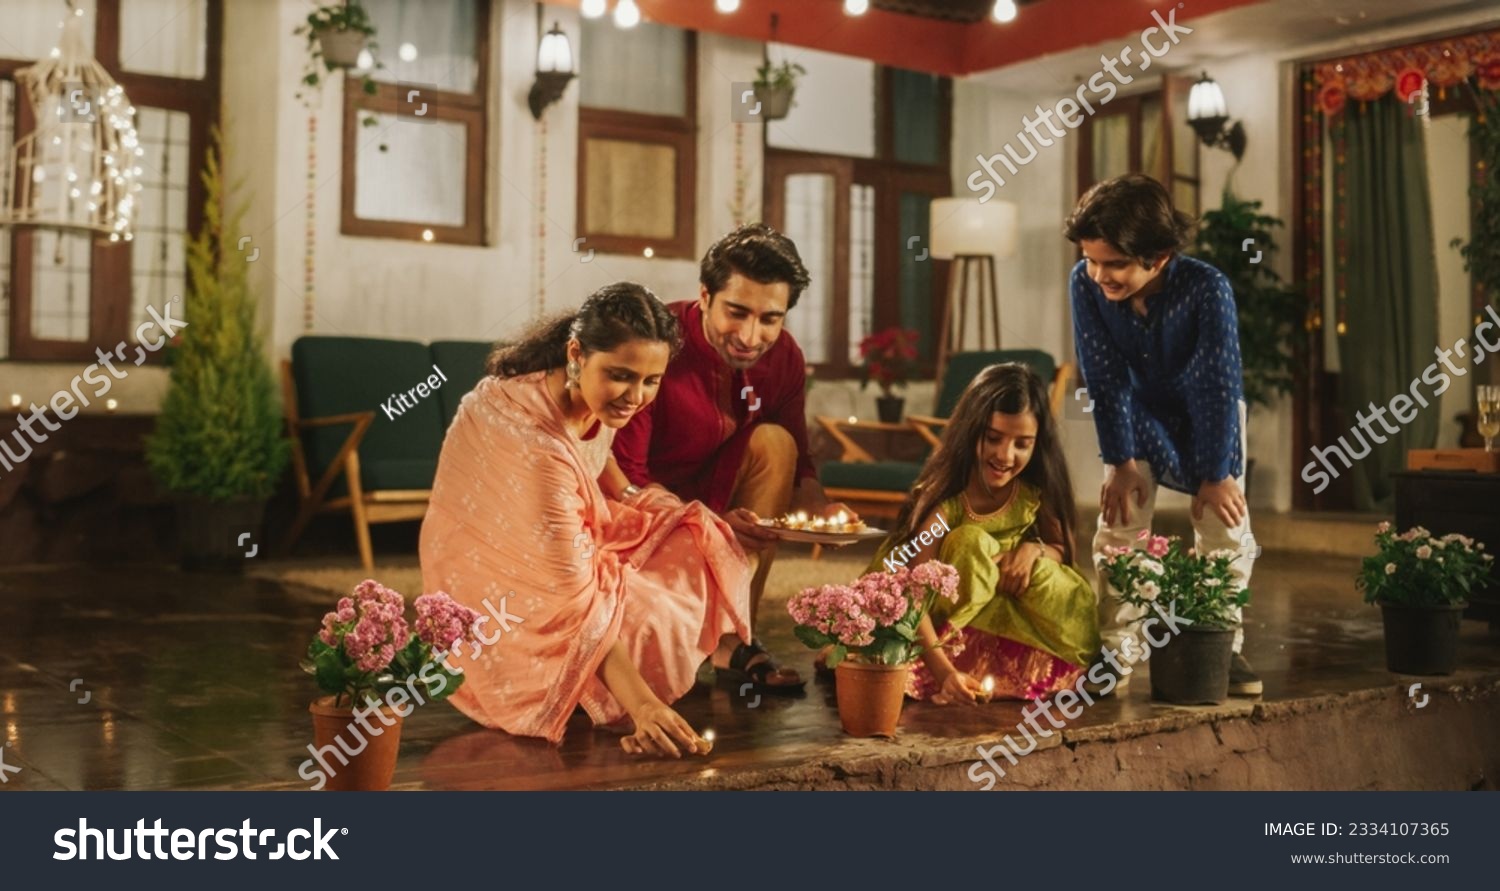 Portrait of an Indian Family Celebrating Divali by Putting Lamps in Their Backyard. Happy Young Parents and Their Exited Children Participating in Hindu Religious Festivities, Festival of Lights #2334107365